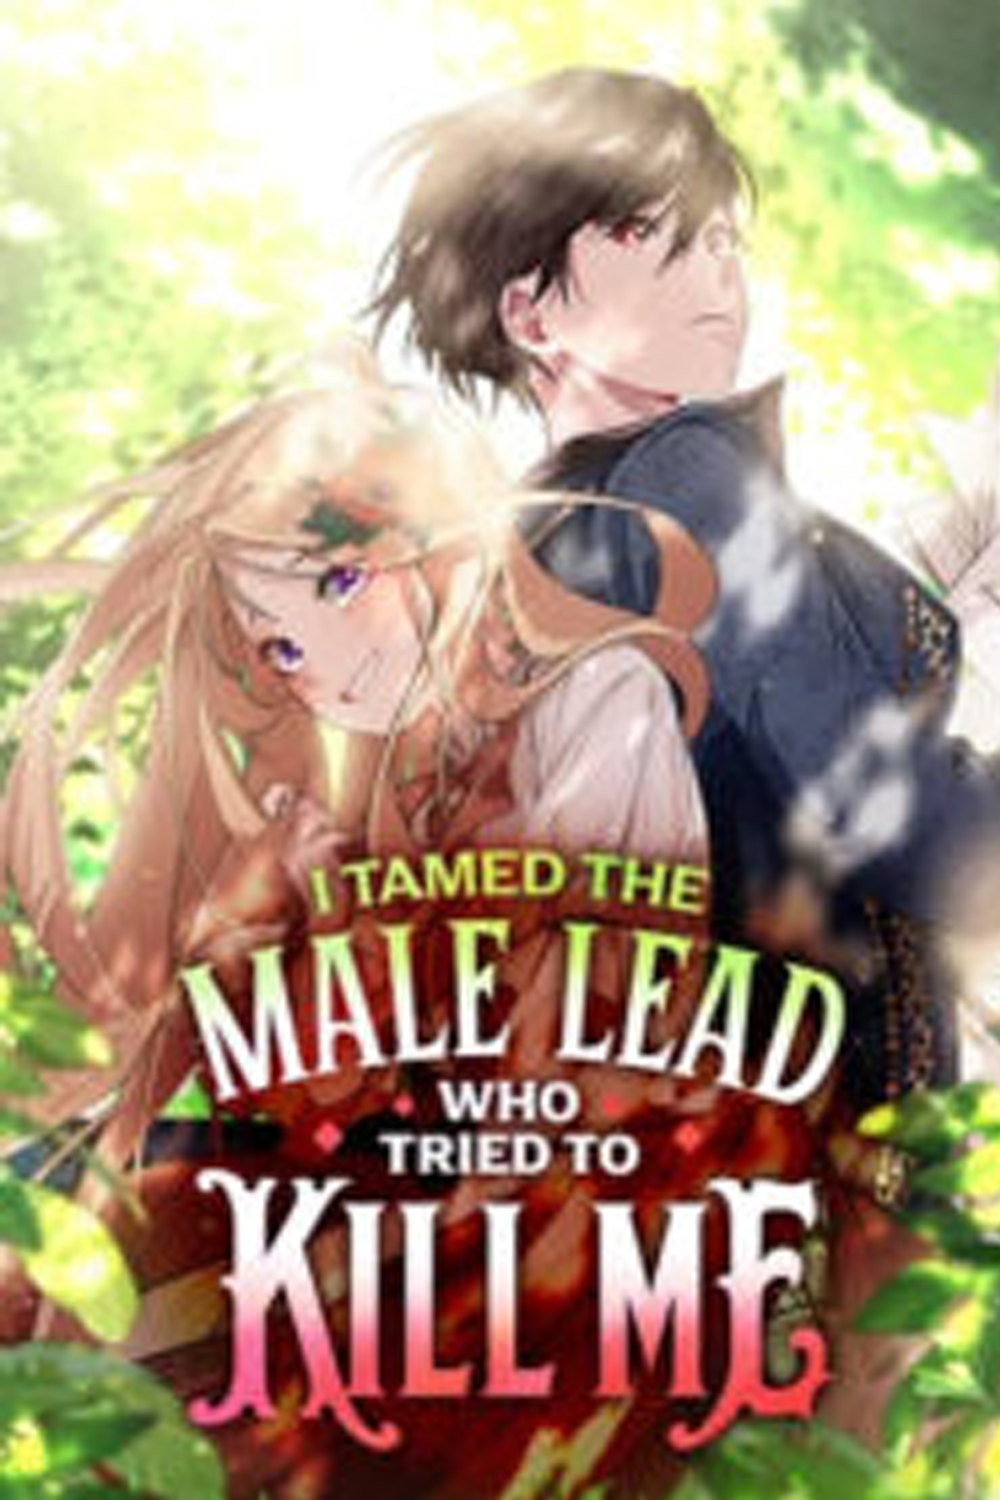 Can I Kill The Male Lead I Tamed the Male Lead Who Tried to Kill Me - MANHWATOP